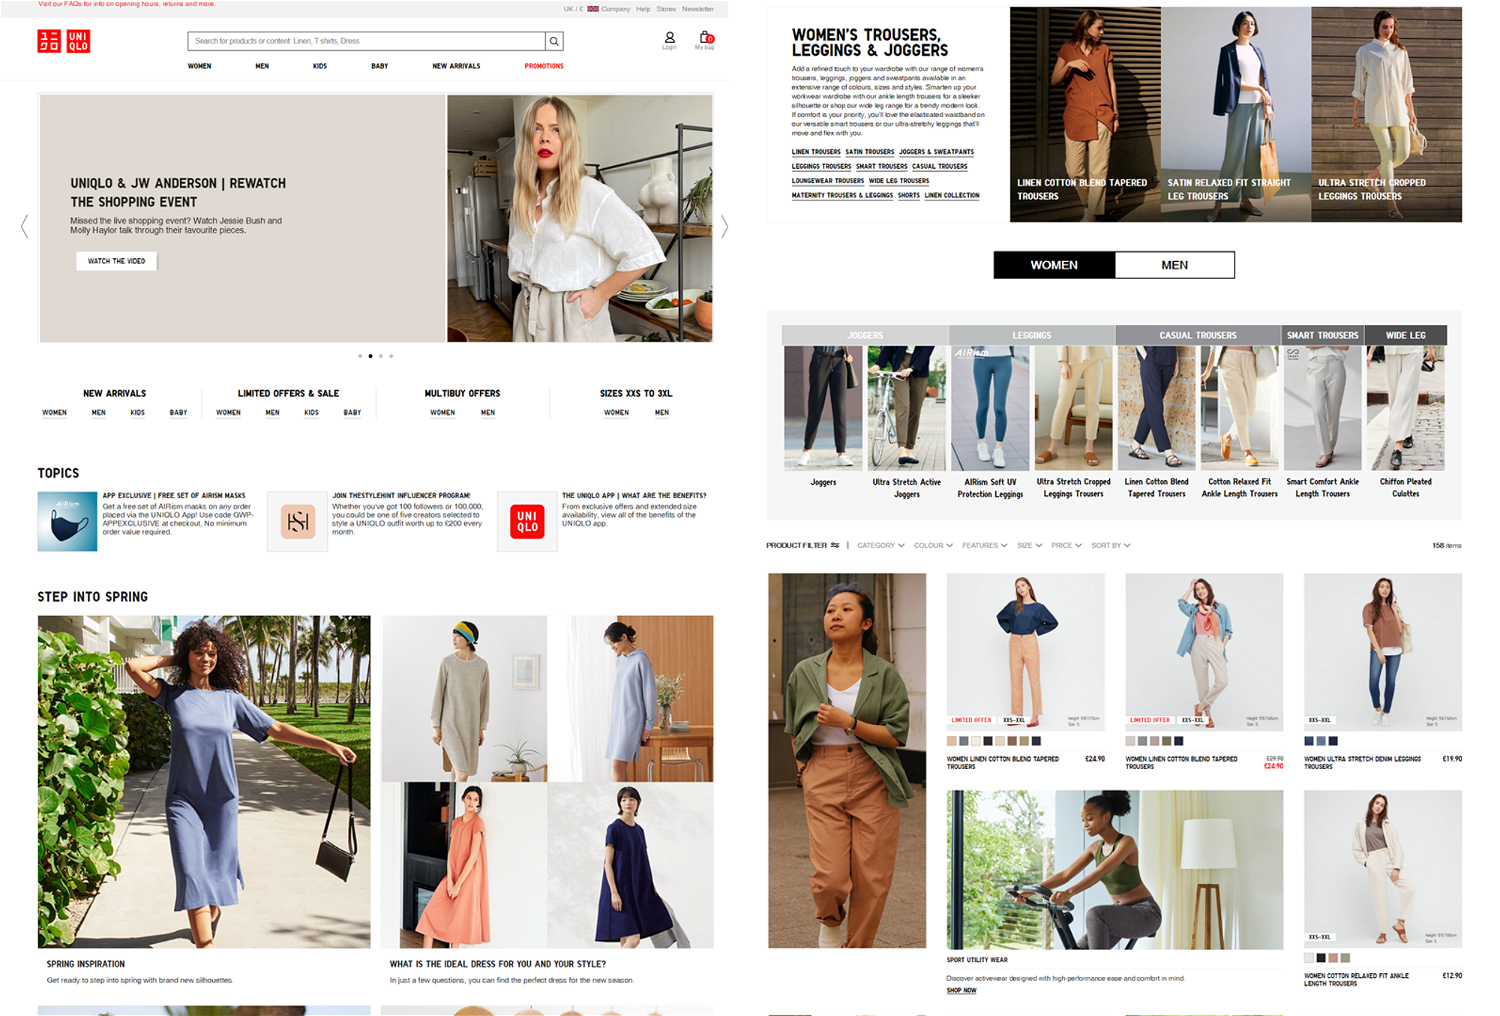 Uniqlo's desktop website. Home page (left) and category page (right)